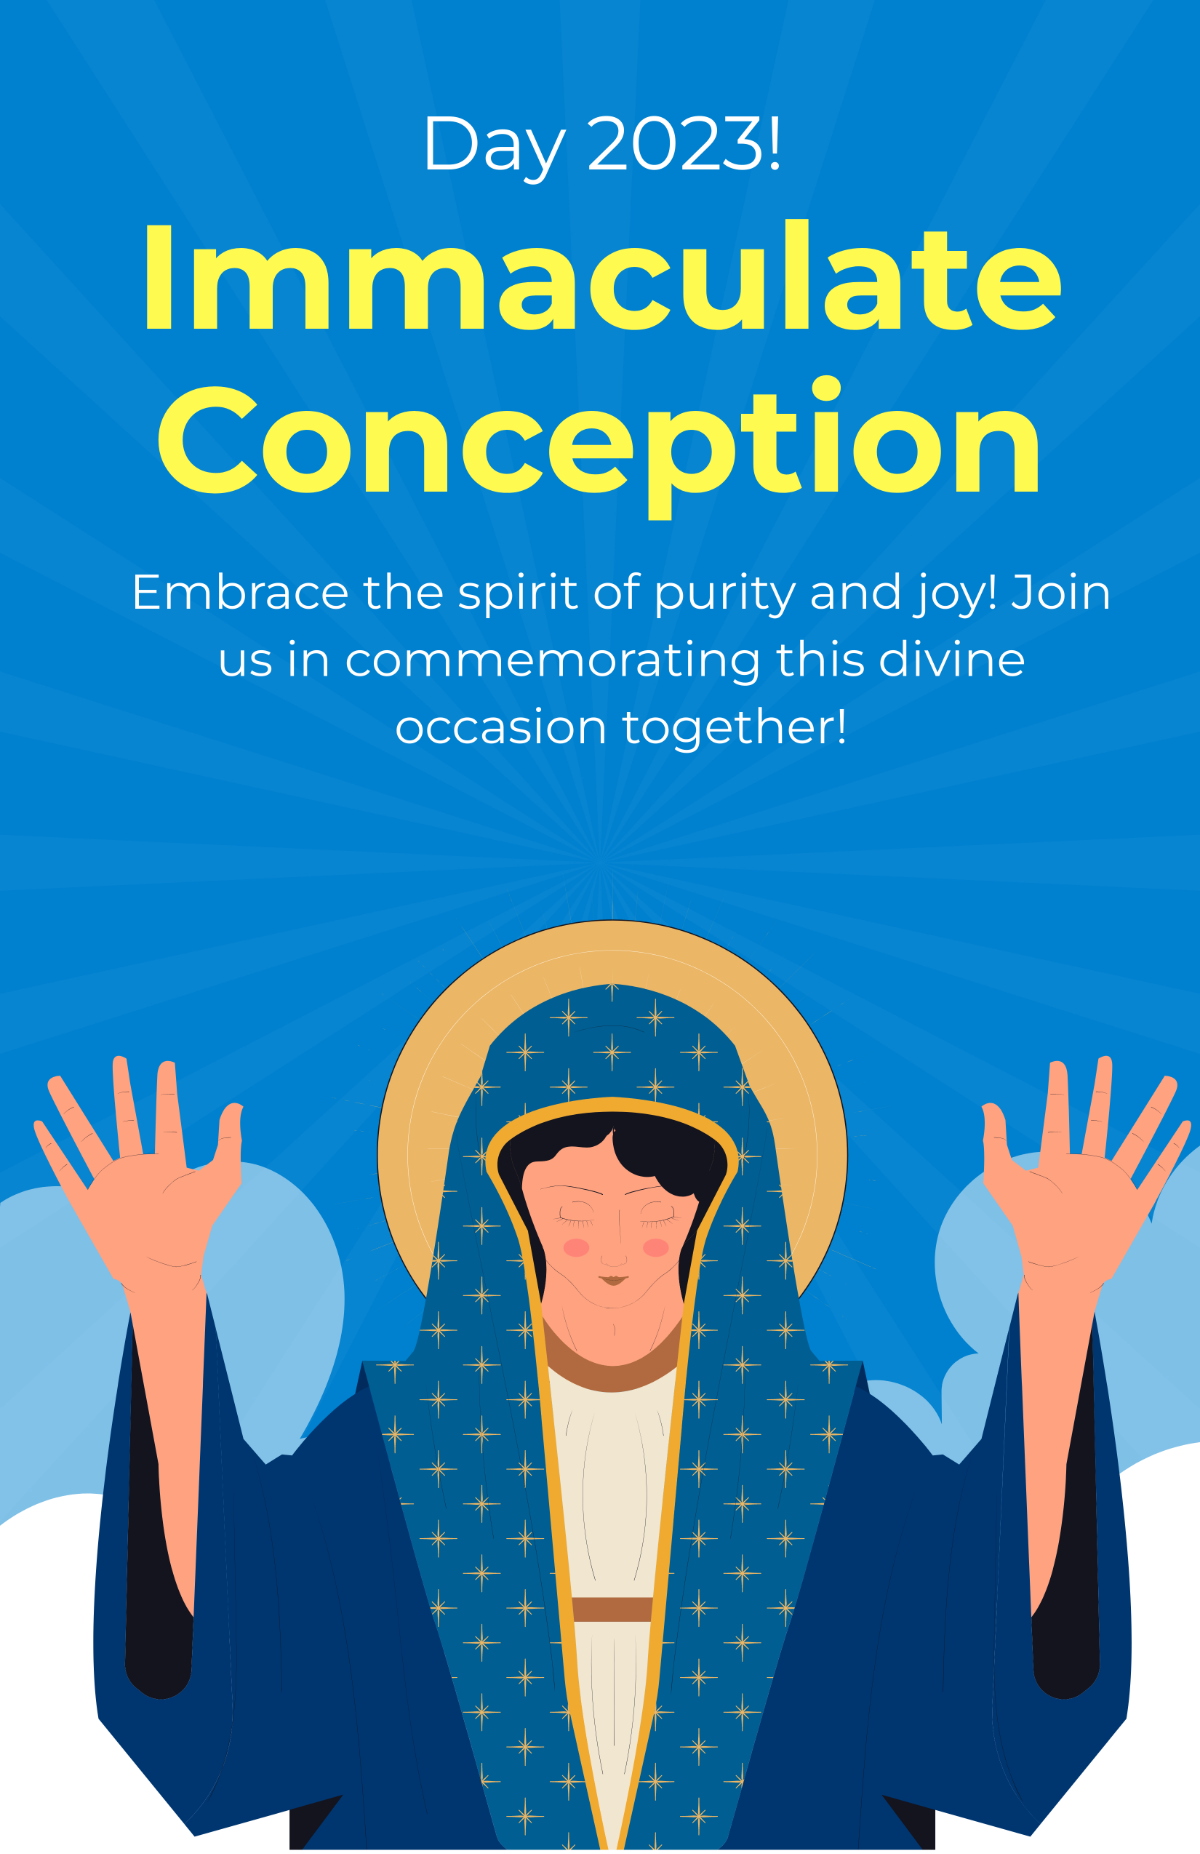 Feast of the Immaculate Conception Day 2023 Poster Template